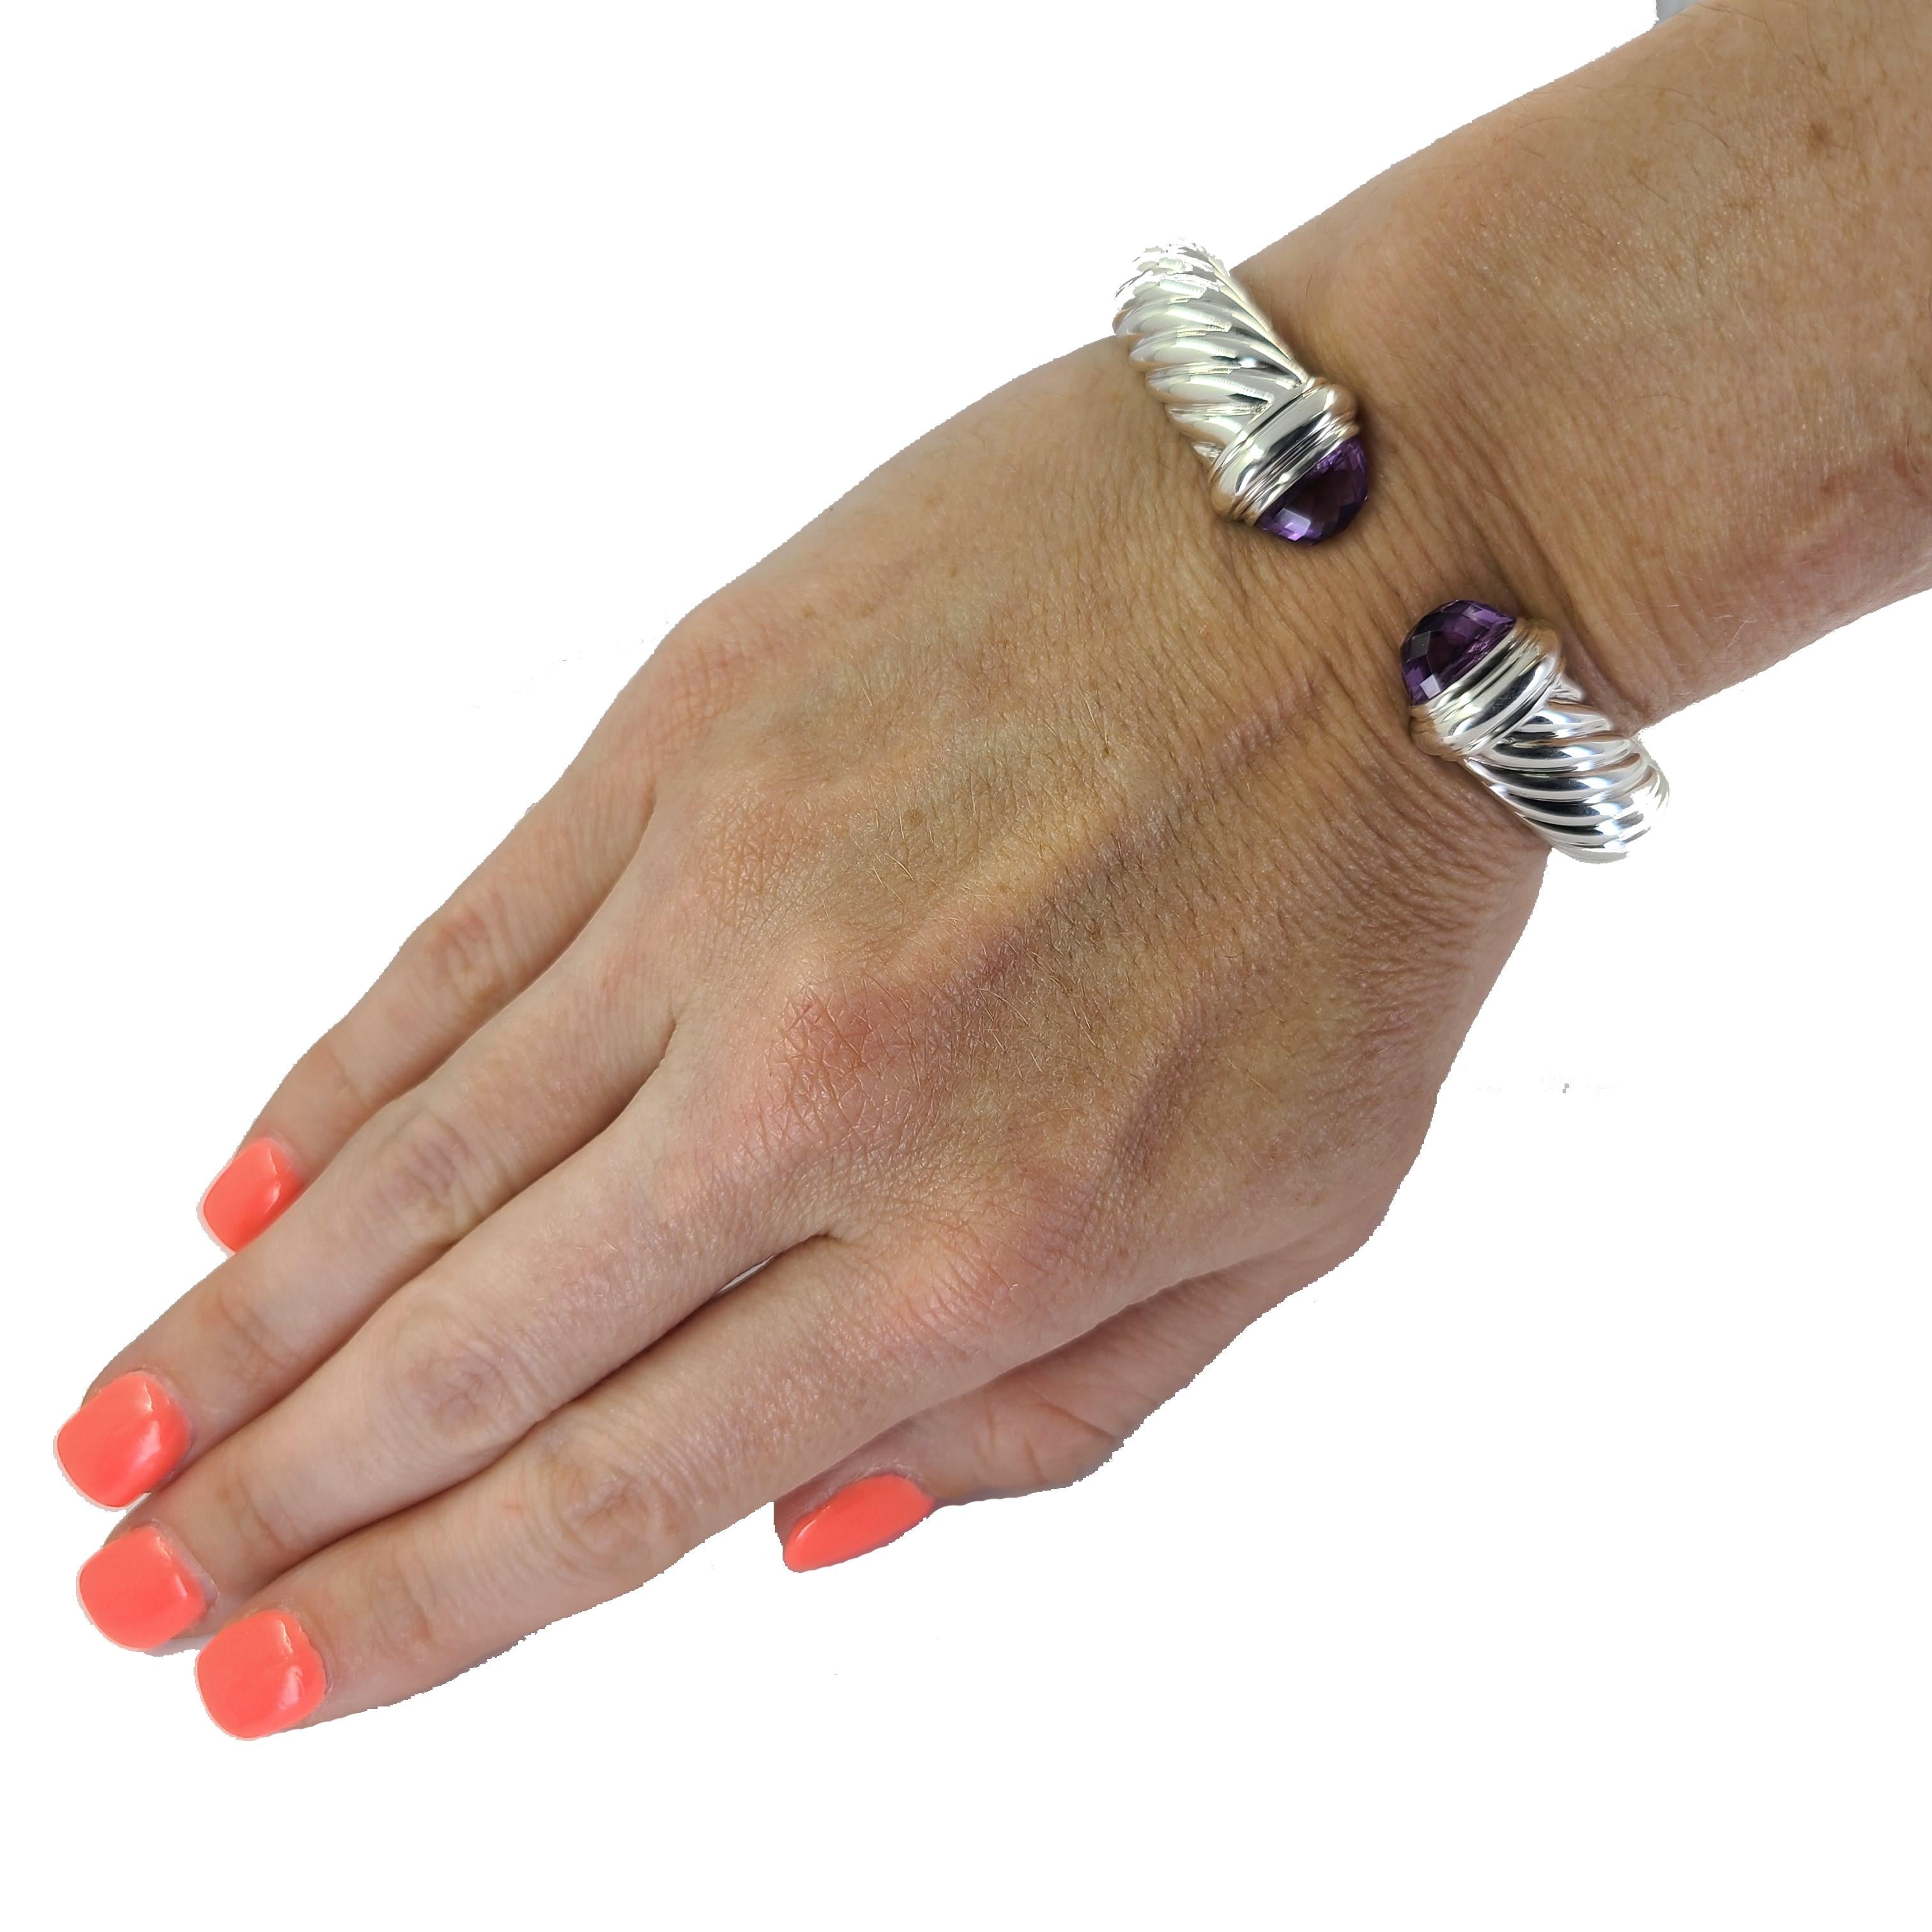 David Yurman Sterling Silver Hinged Cuff Featuring Faceted Amethyst Ends. Original MSRP $875.